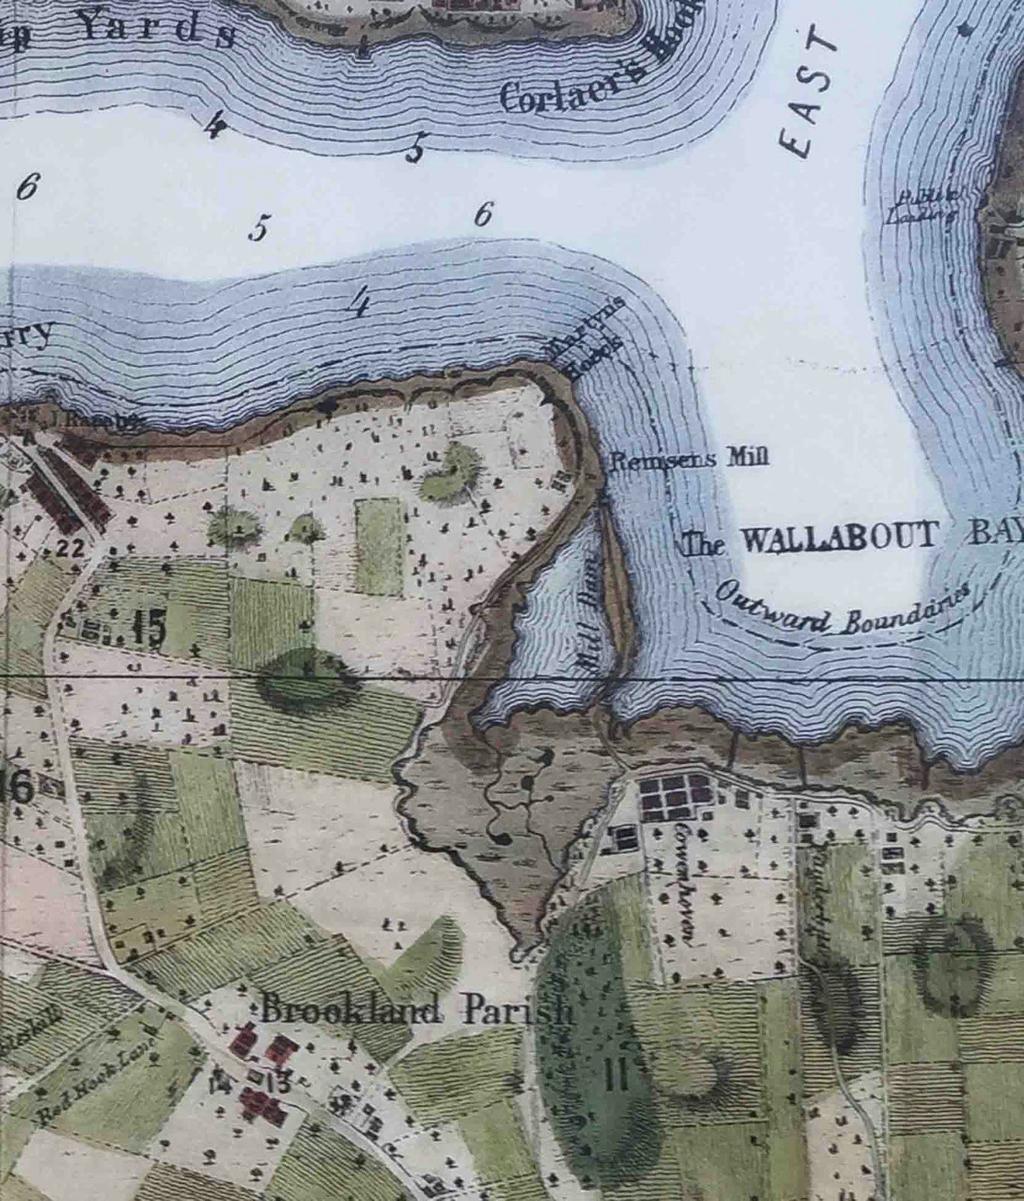 Here we see a zoomed in version of the Vinegar hill and future Brooklyn Navy yard area. There is a large amount of marsh land that is near the cost and we see Remsens Mill, owned by Abraham Remsen.